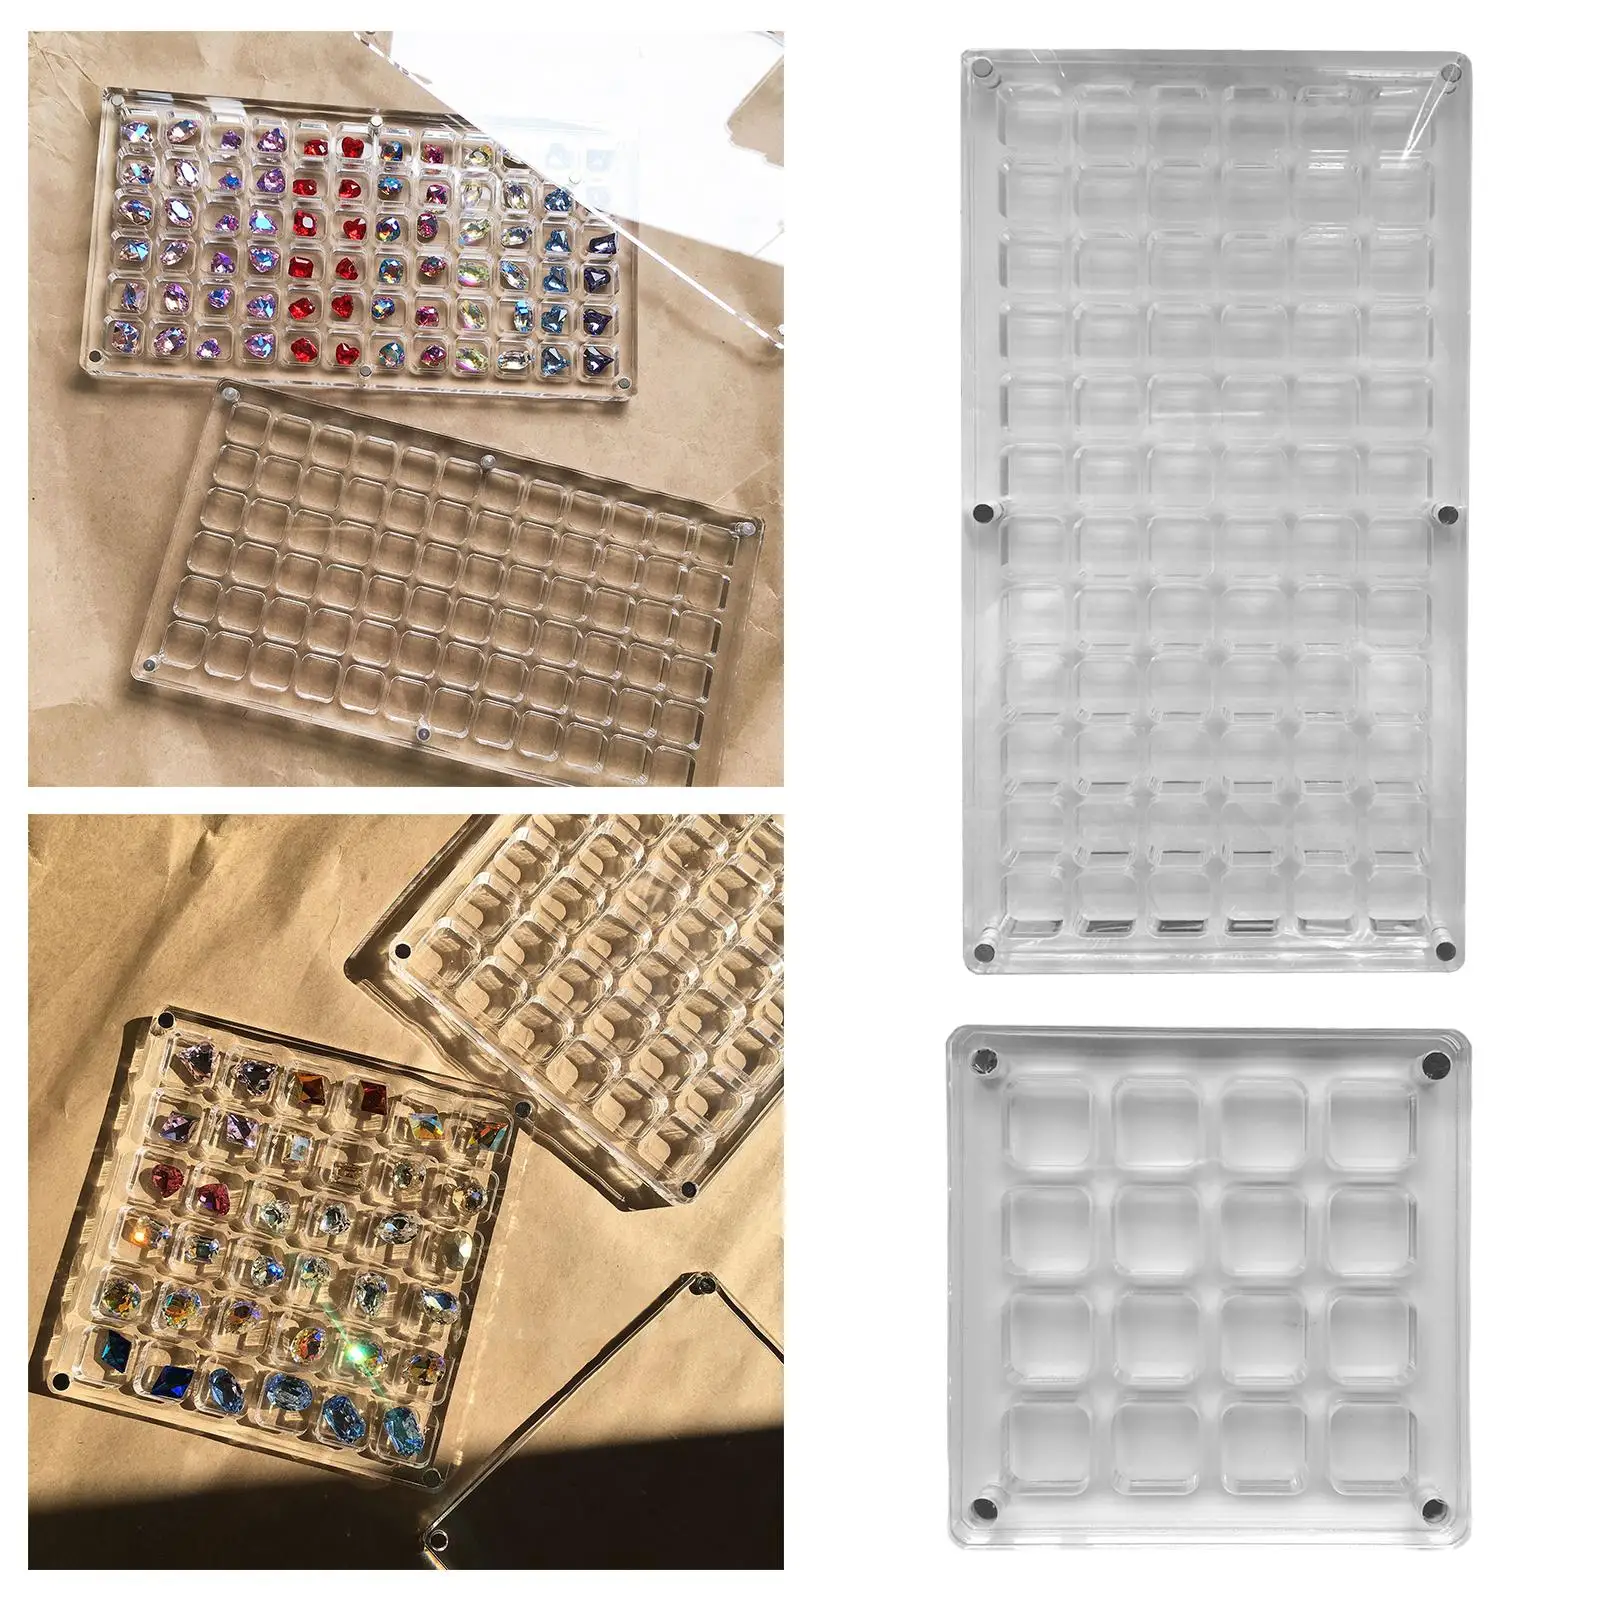 Display Box Dustproof Nails Drill Storage Box Detachable Cover Organizer for Nail Art Charms Rhinestones for Nail Art Manicure